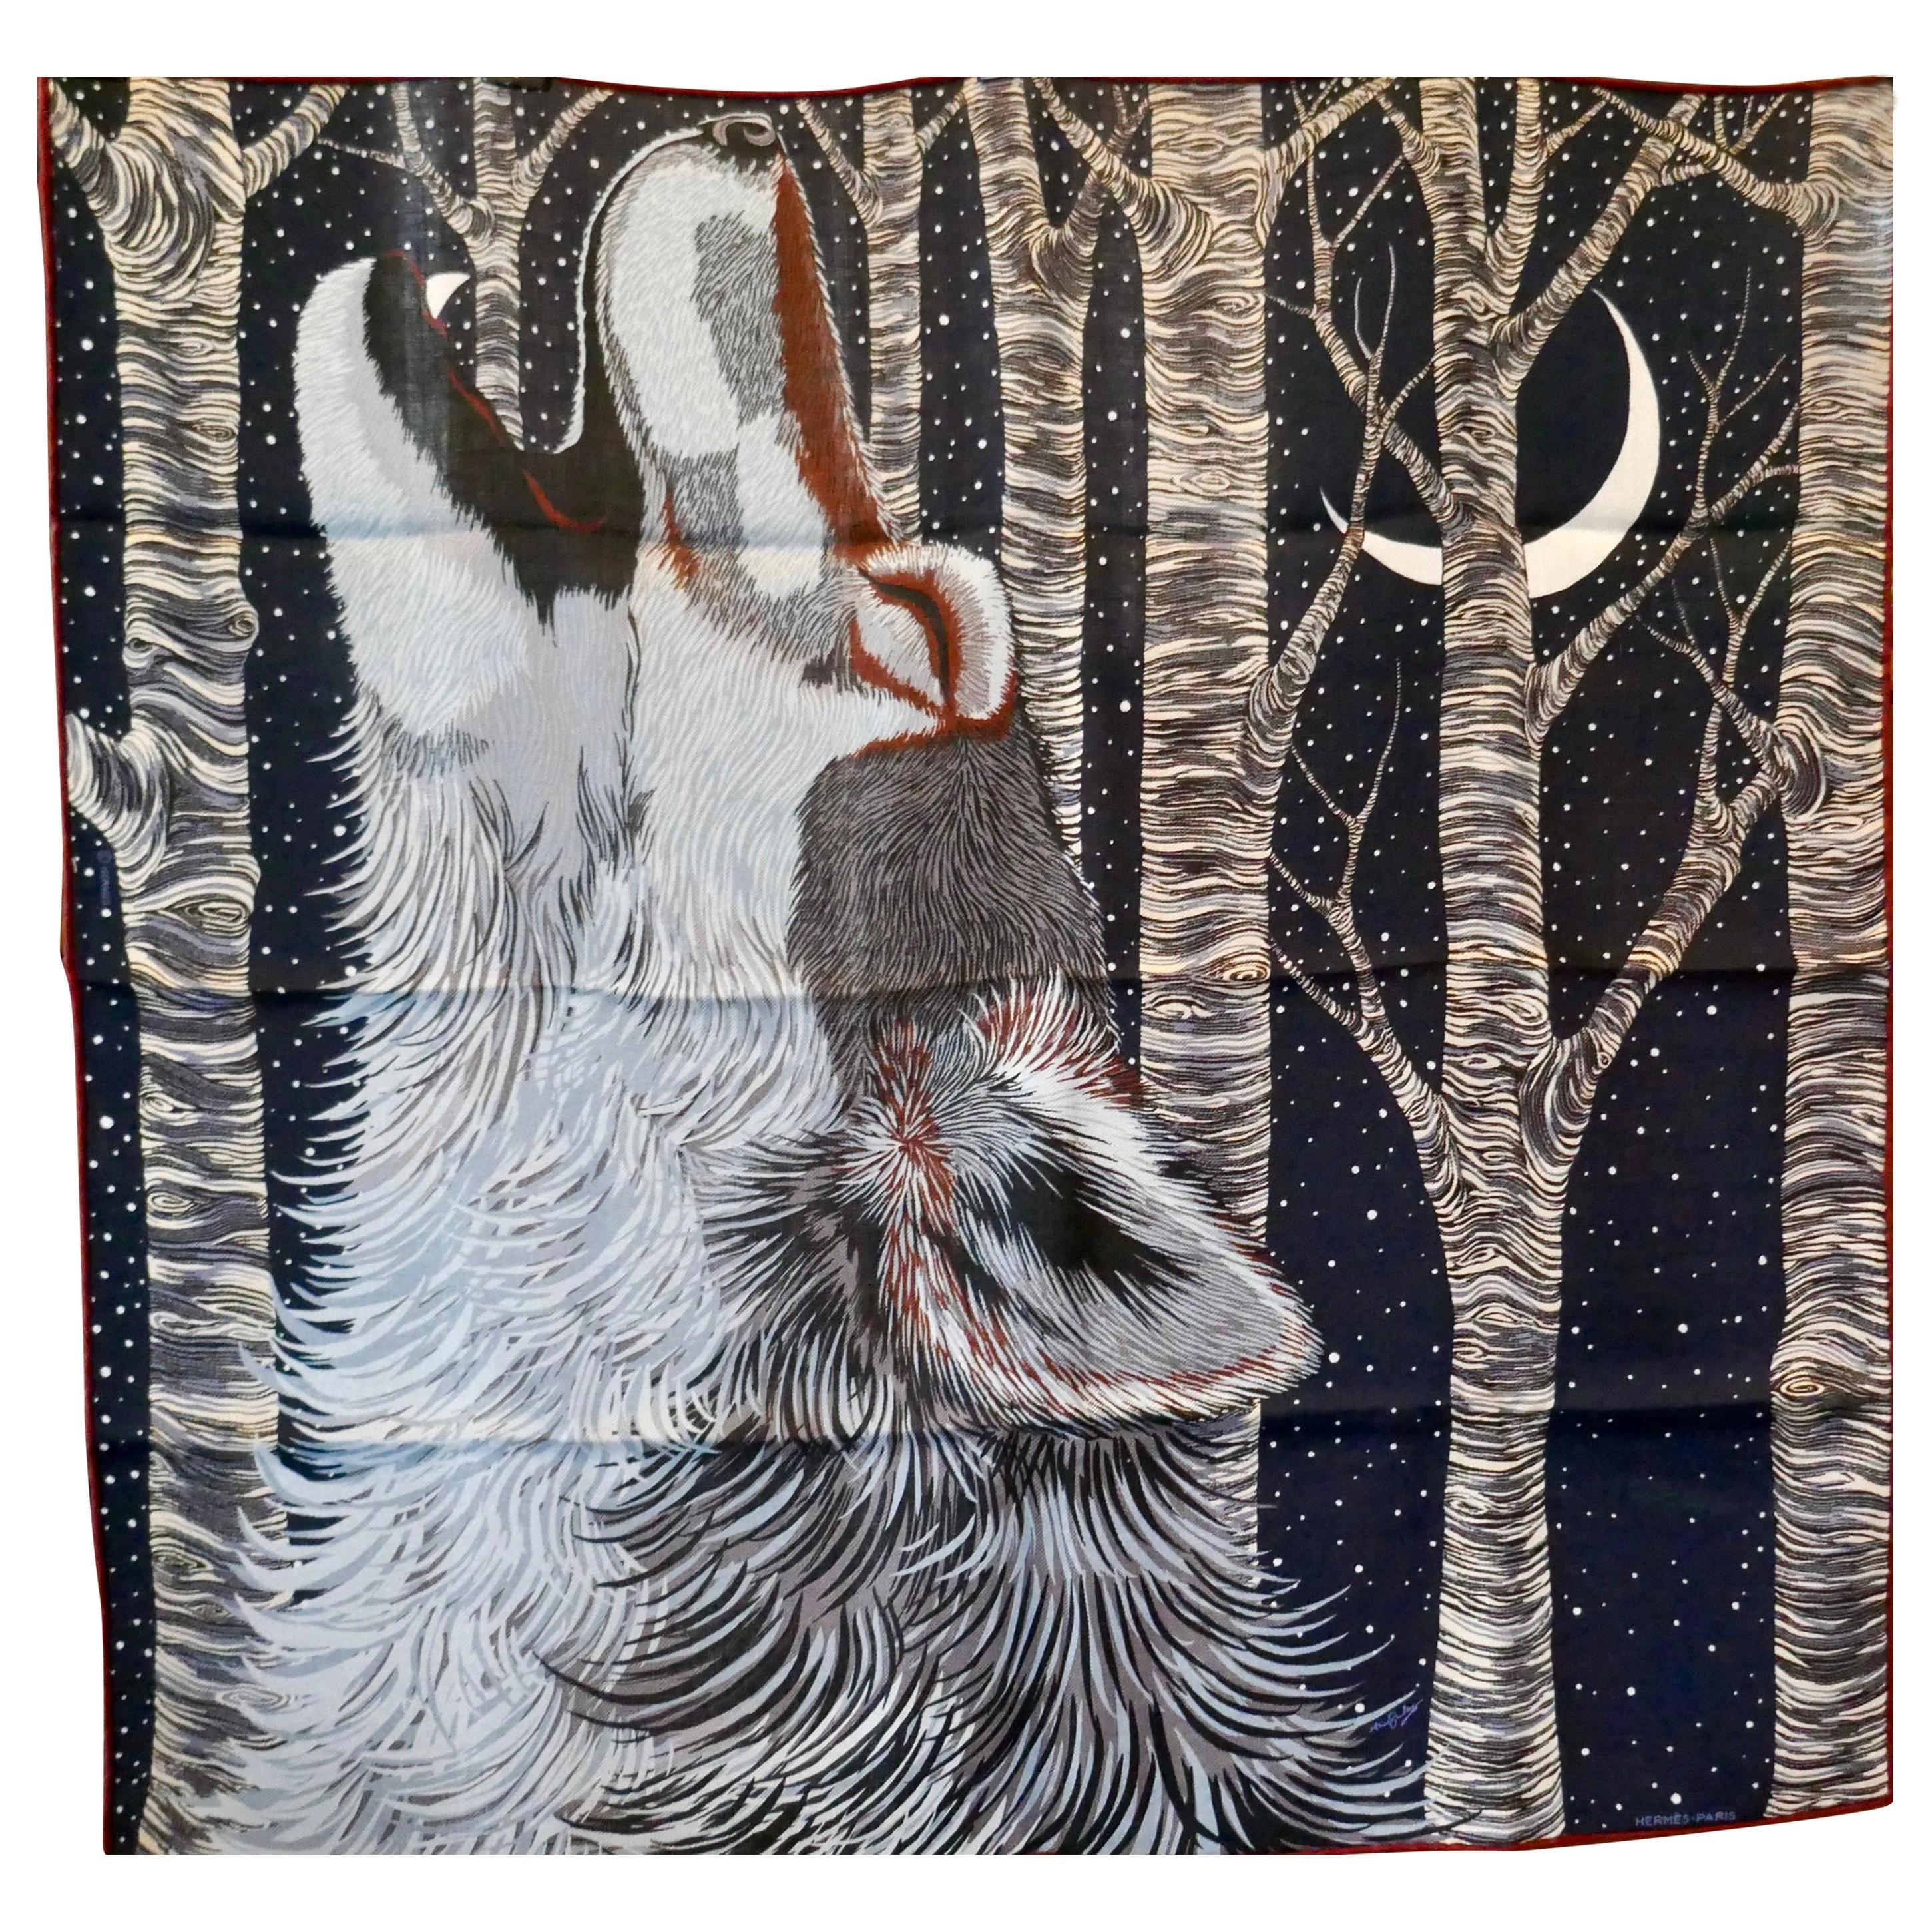 Hermes Very Special Issue Cashmere and Silk Scarf “AW00000” by Alice Shirley  